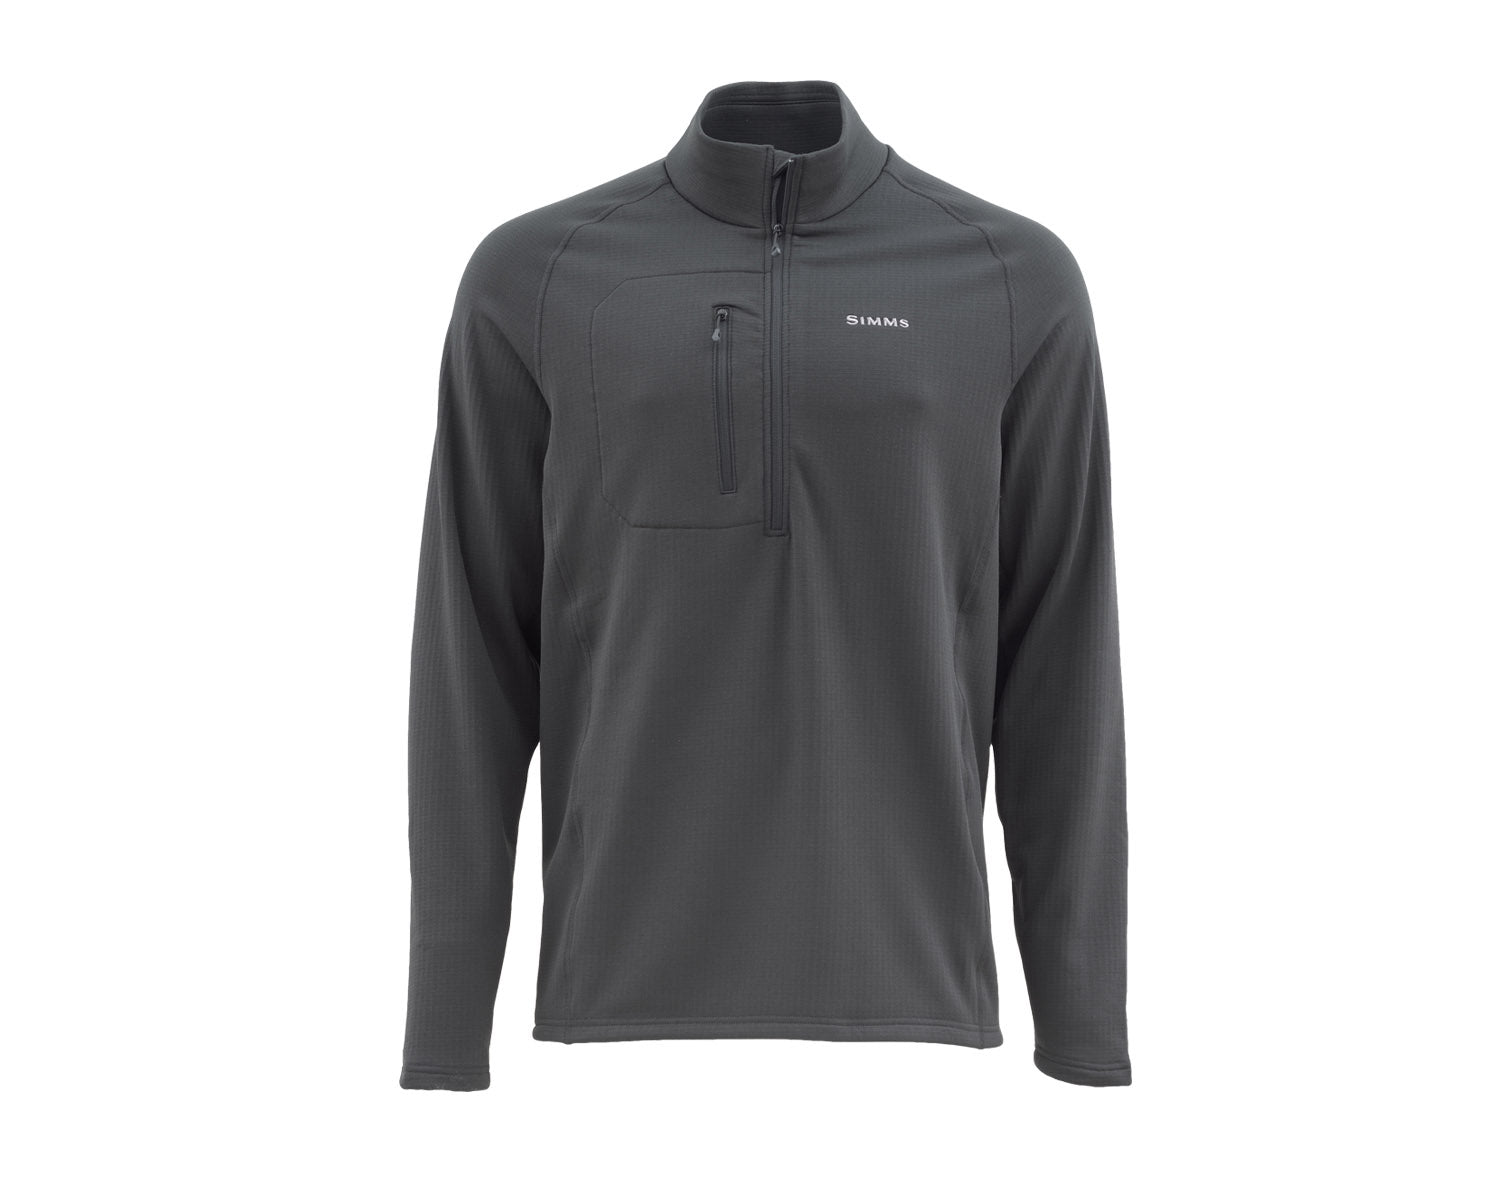 Simms Fleece Midlayer Top - M - Mansfield Hunting & Fishing - Products to prepare for Corona Virus